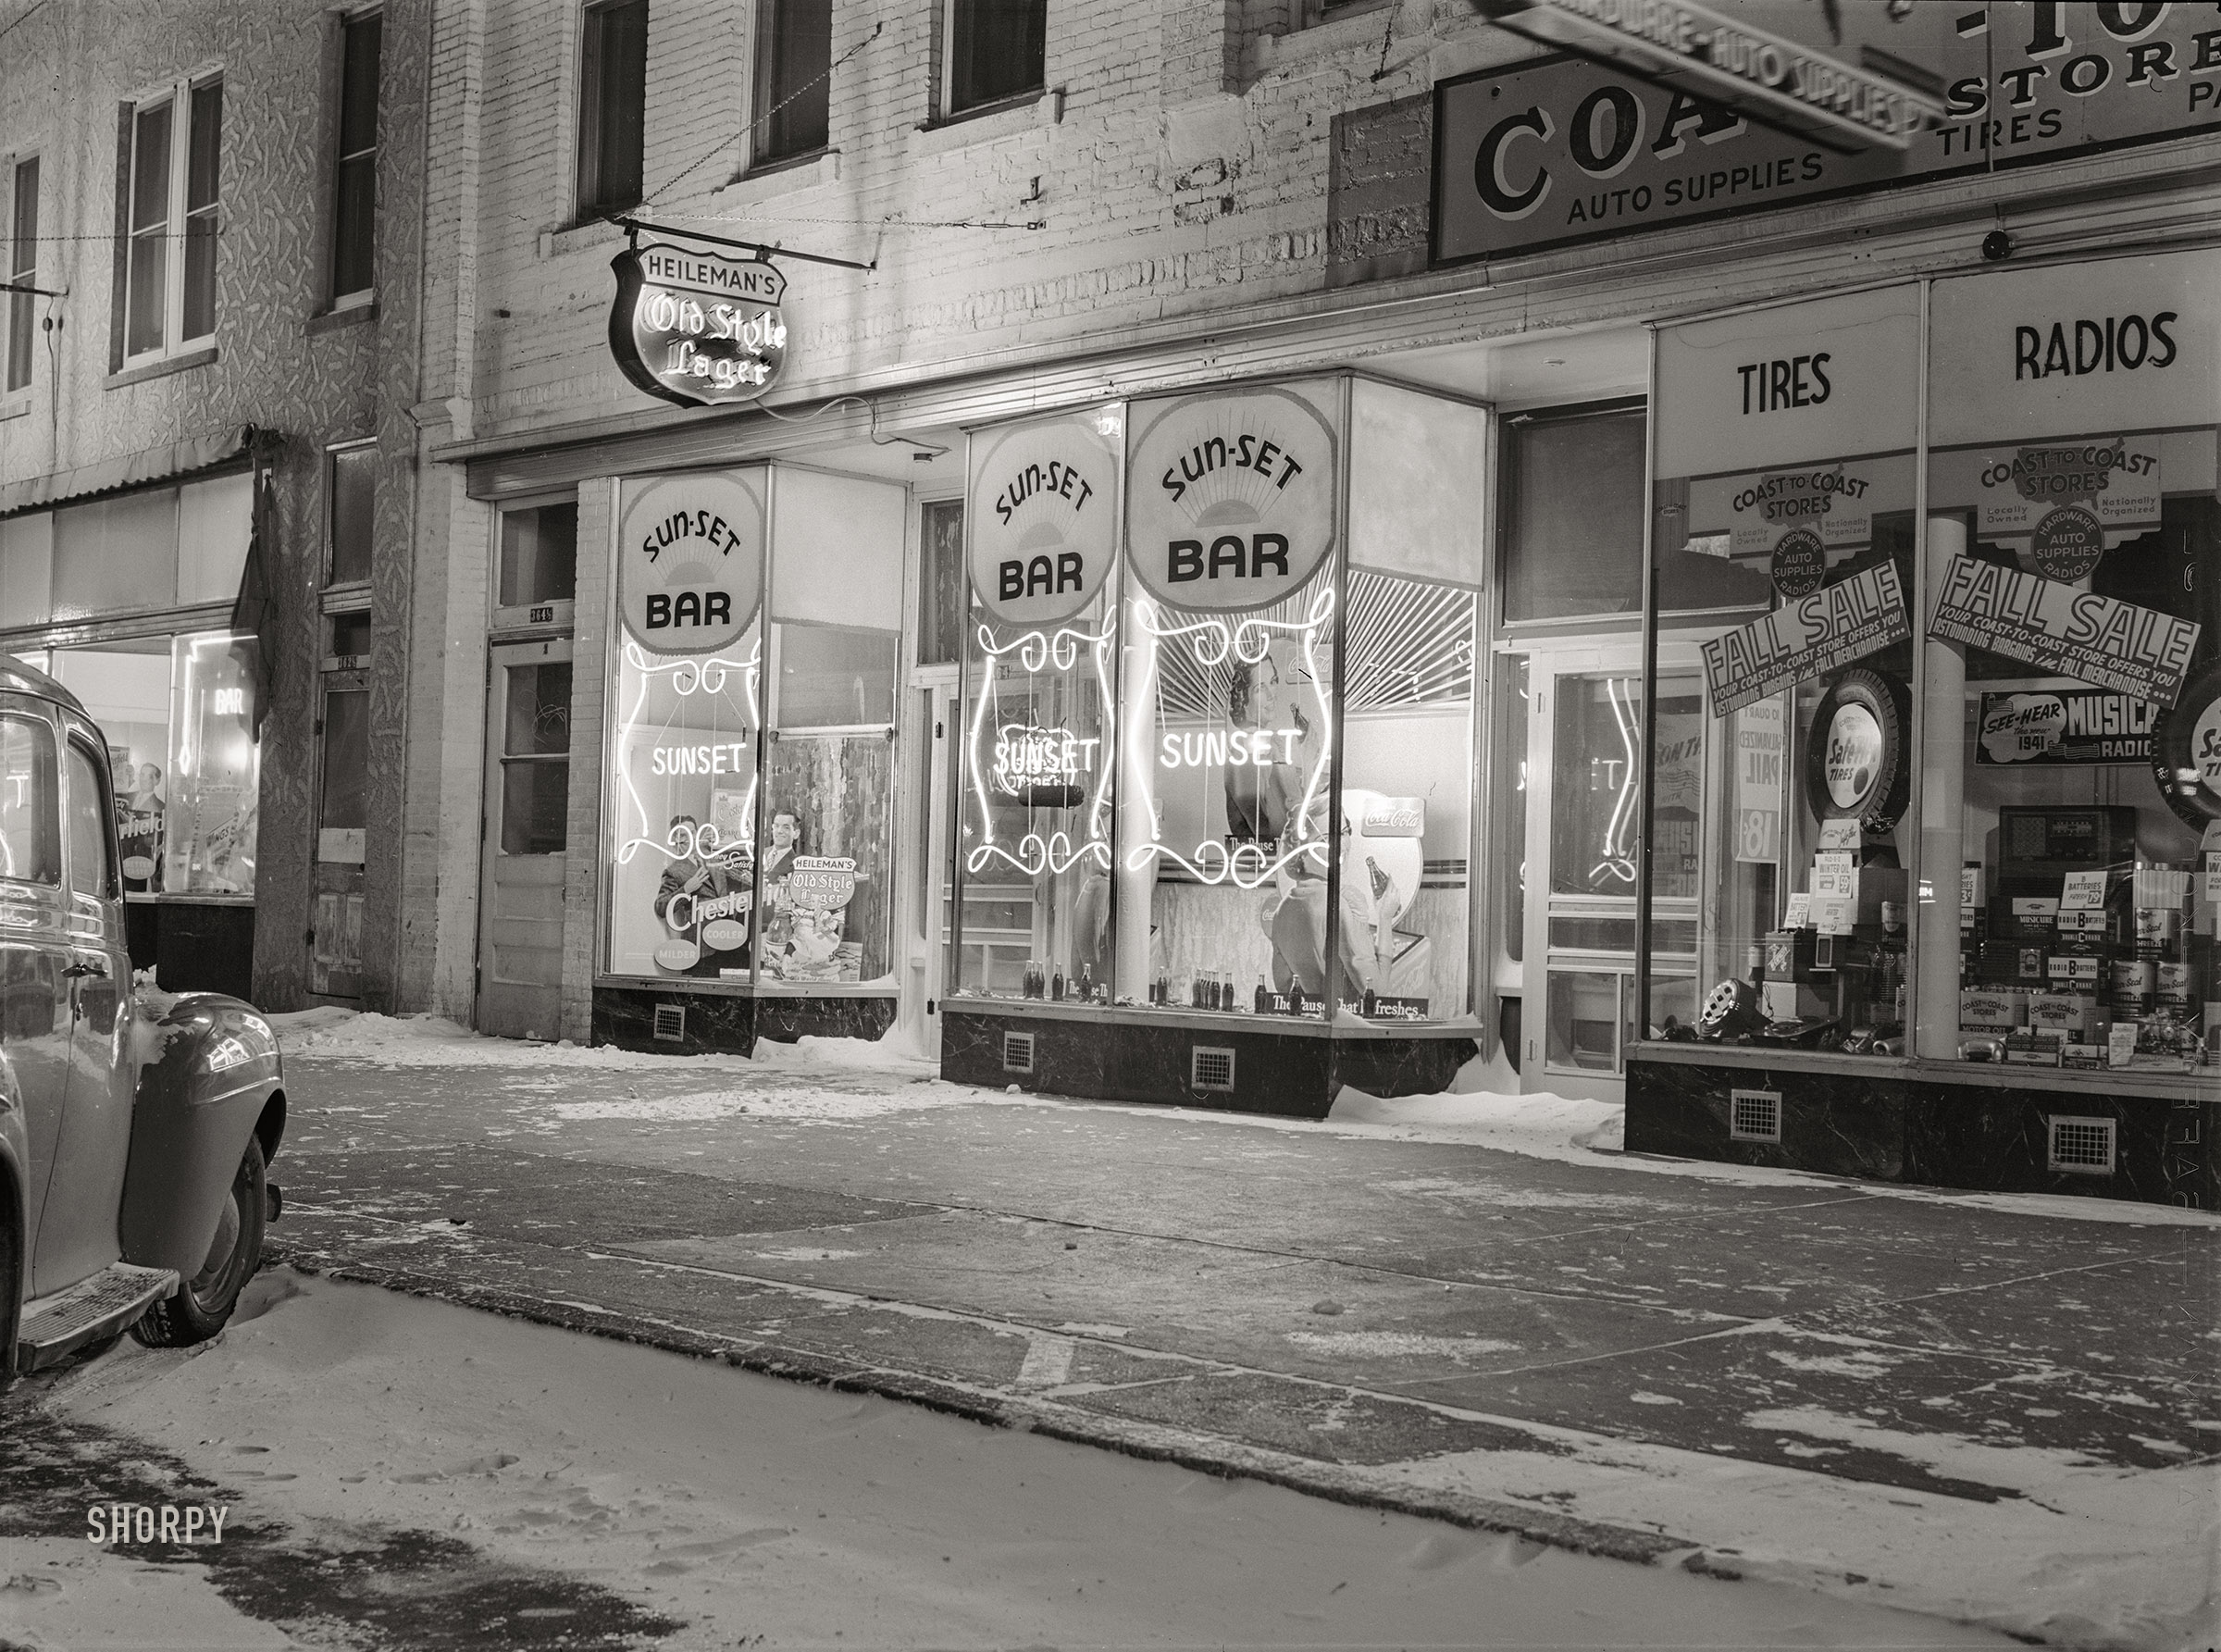 November 1940. "Pierre, South Dakota, on a cold night." Medium format acetate negative by John Vachon for the Farm Security Administration. View full size.
&nbsp; &nbsp; &nbsp; &nbsp; About these images: The exposures by John Vachon, Marion Post Wolcott and other FSA photographers that we've been posting over the past few months may be around 80 years old, but have only recently been scanned in high resolution and made available for download by the Library of Congress. So in that sense they're "new" -- the photo above, for example, is from a batch of around 300 negatives scanned in October 2019 and published to the LOC website on December 12. These high-quality scans are gradually replacing the low-resolution images that have populated the LOC's online archive since 2011.
